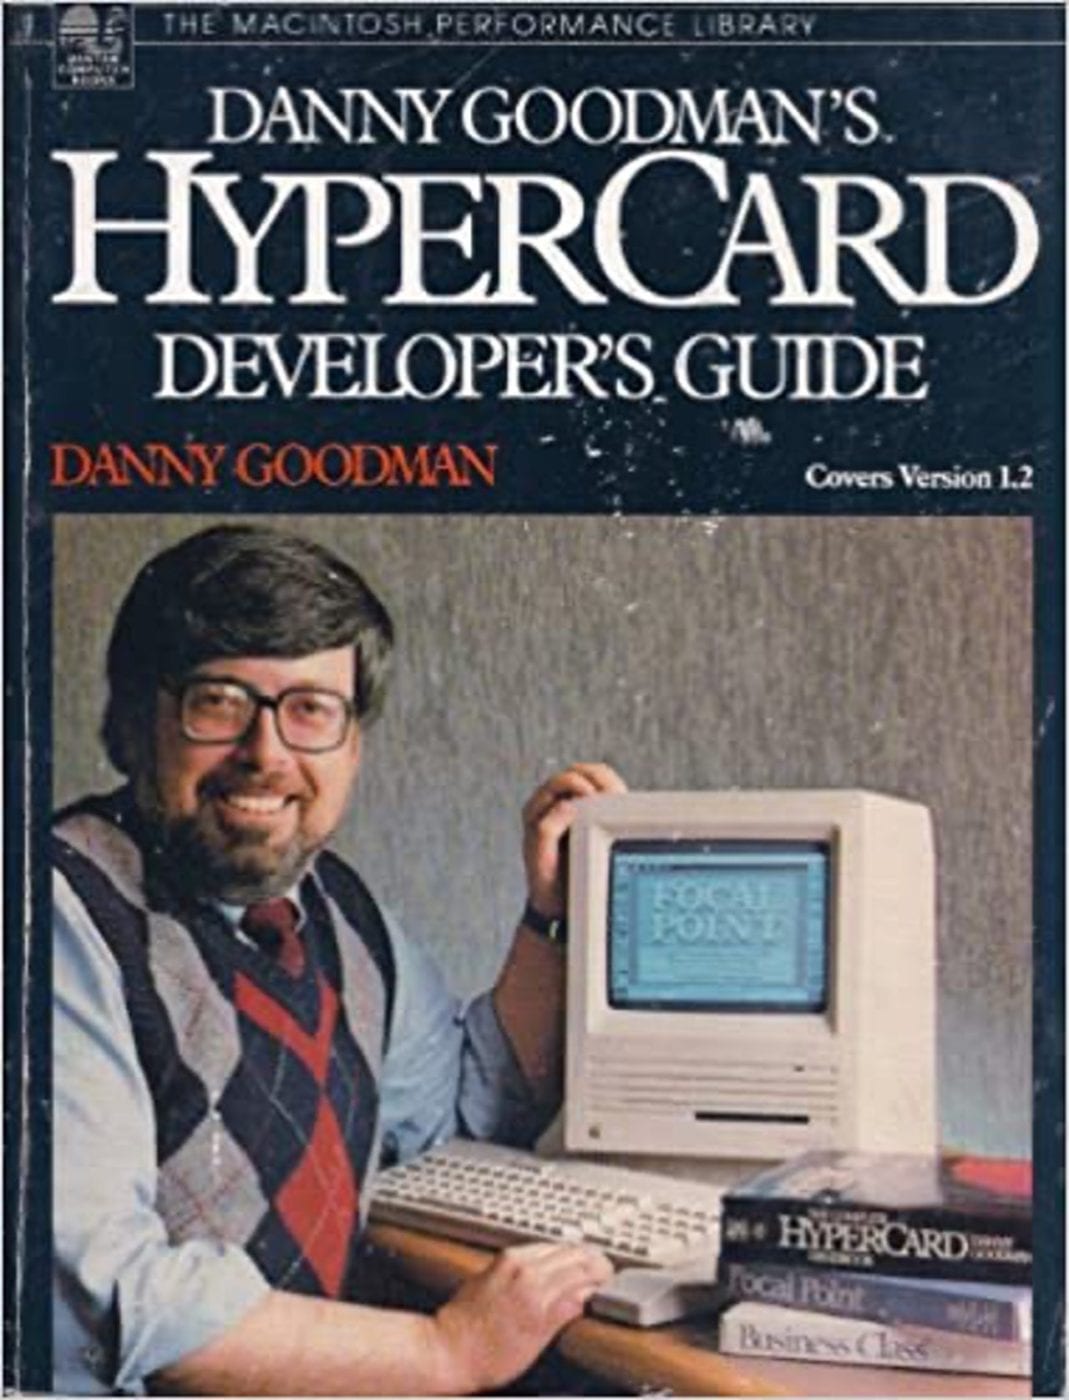 Danny Goodman probably did more to popularize HyperCard as a powerful programming and prototyping tool than anyone else